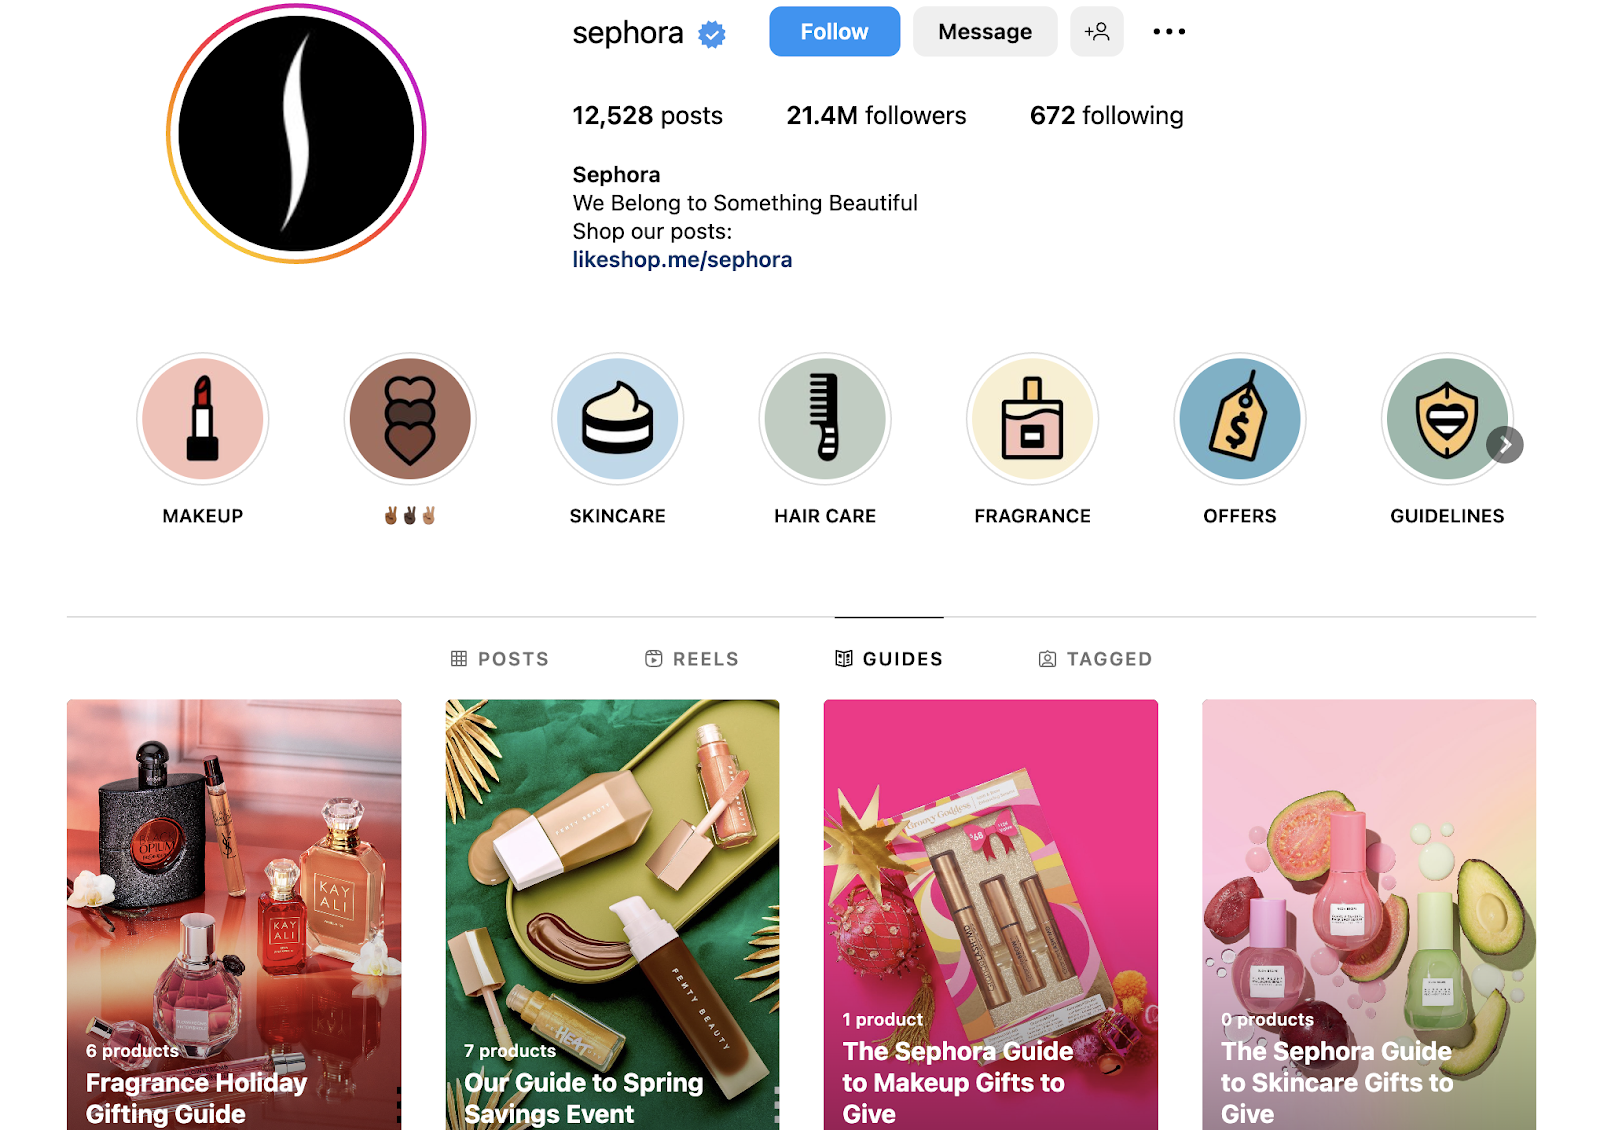 Sephora Instagram page showing strong social media presence